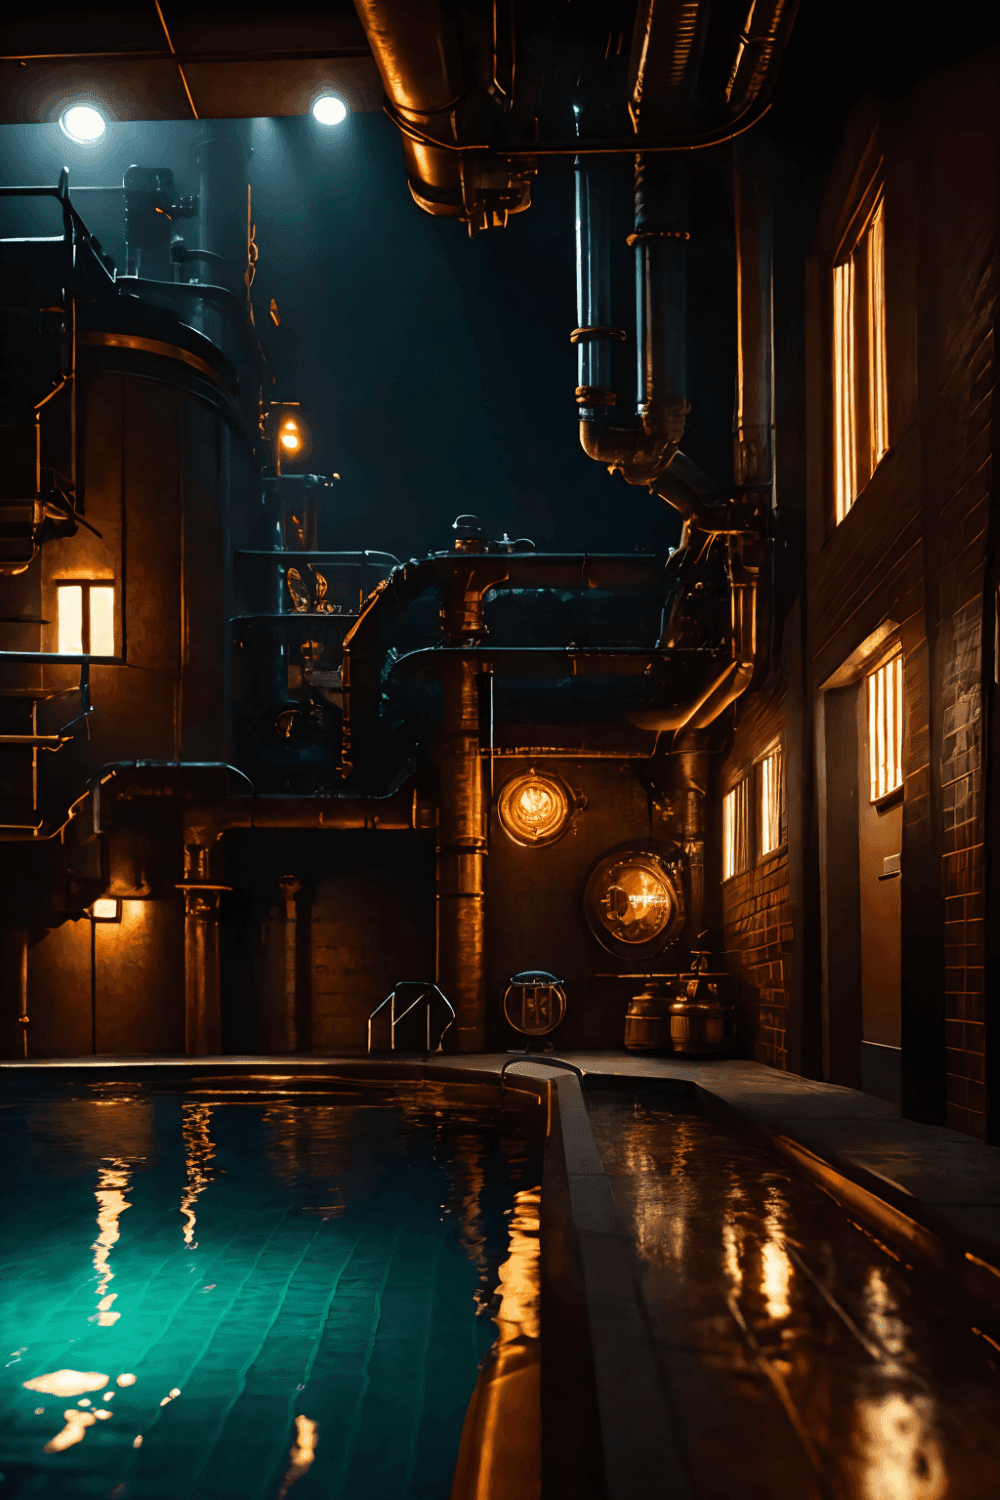 Copper pipes and industrial parts around a swimming pool